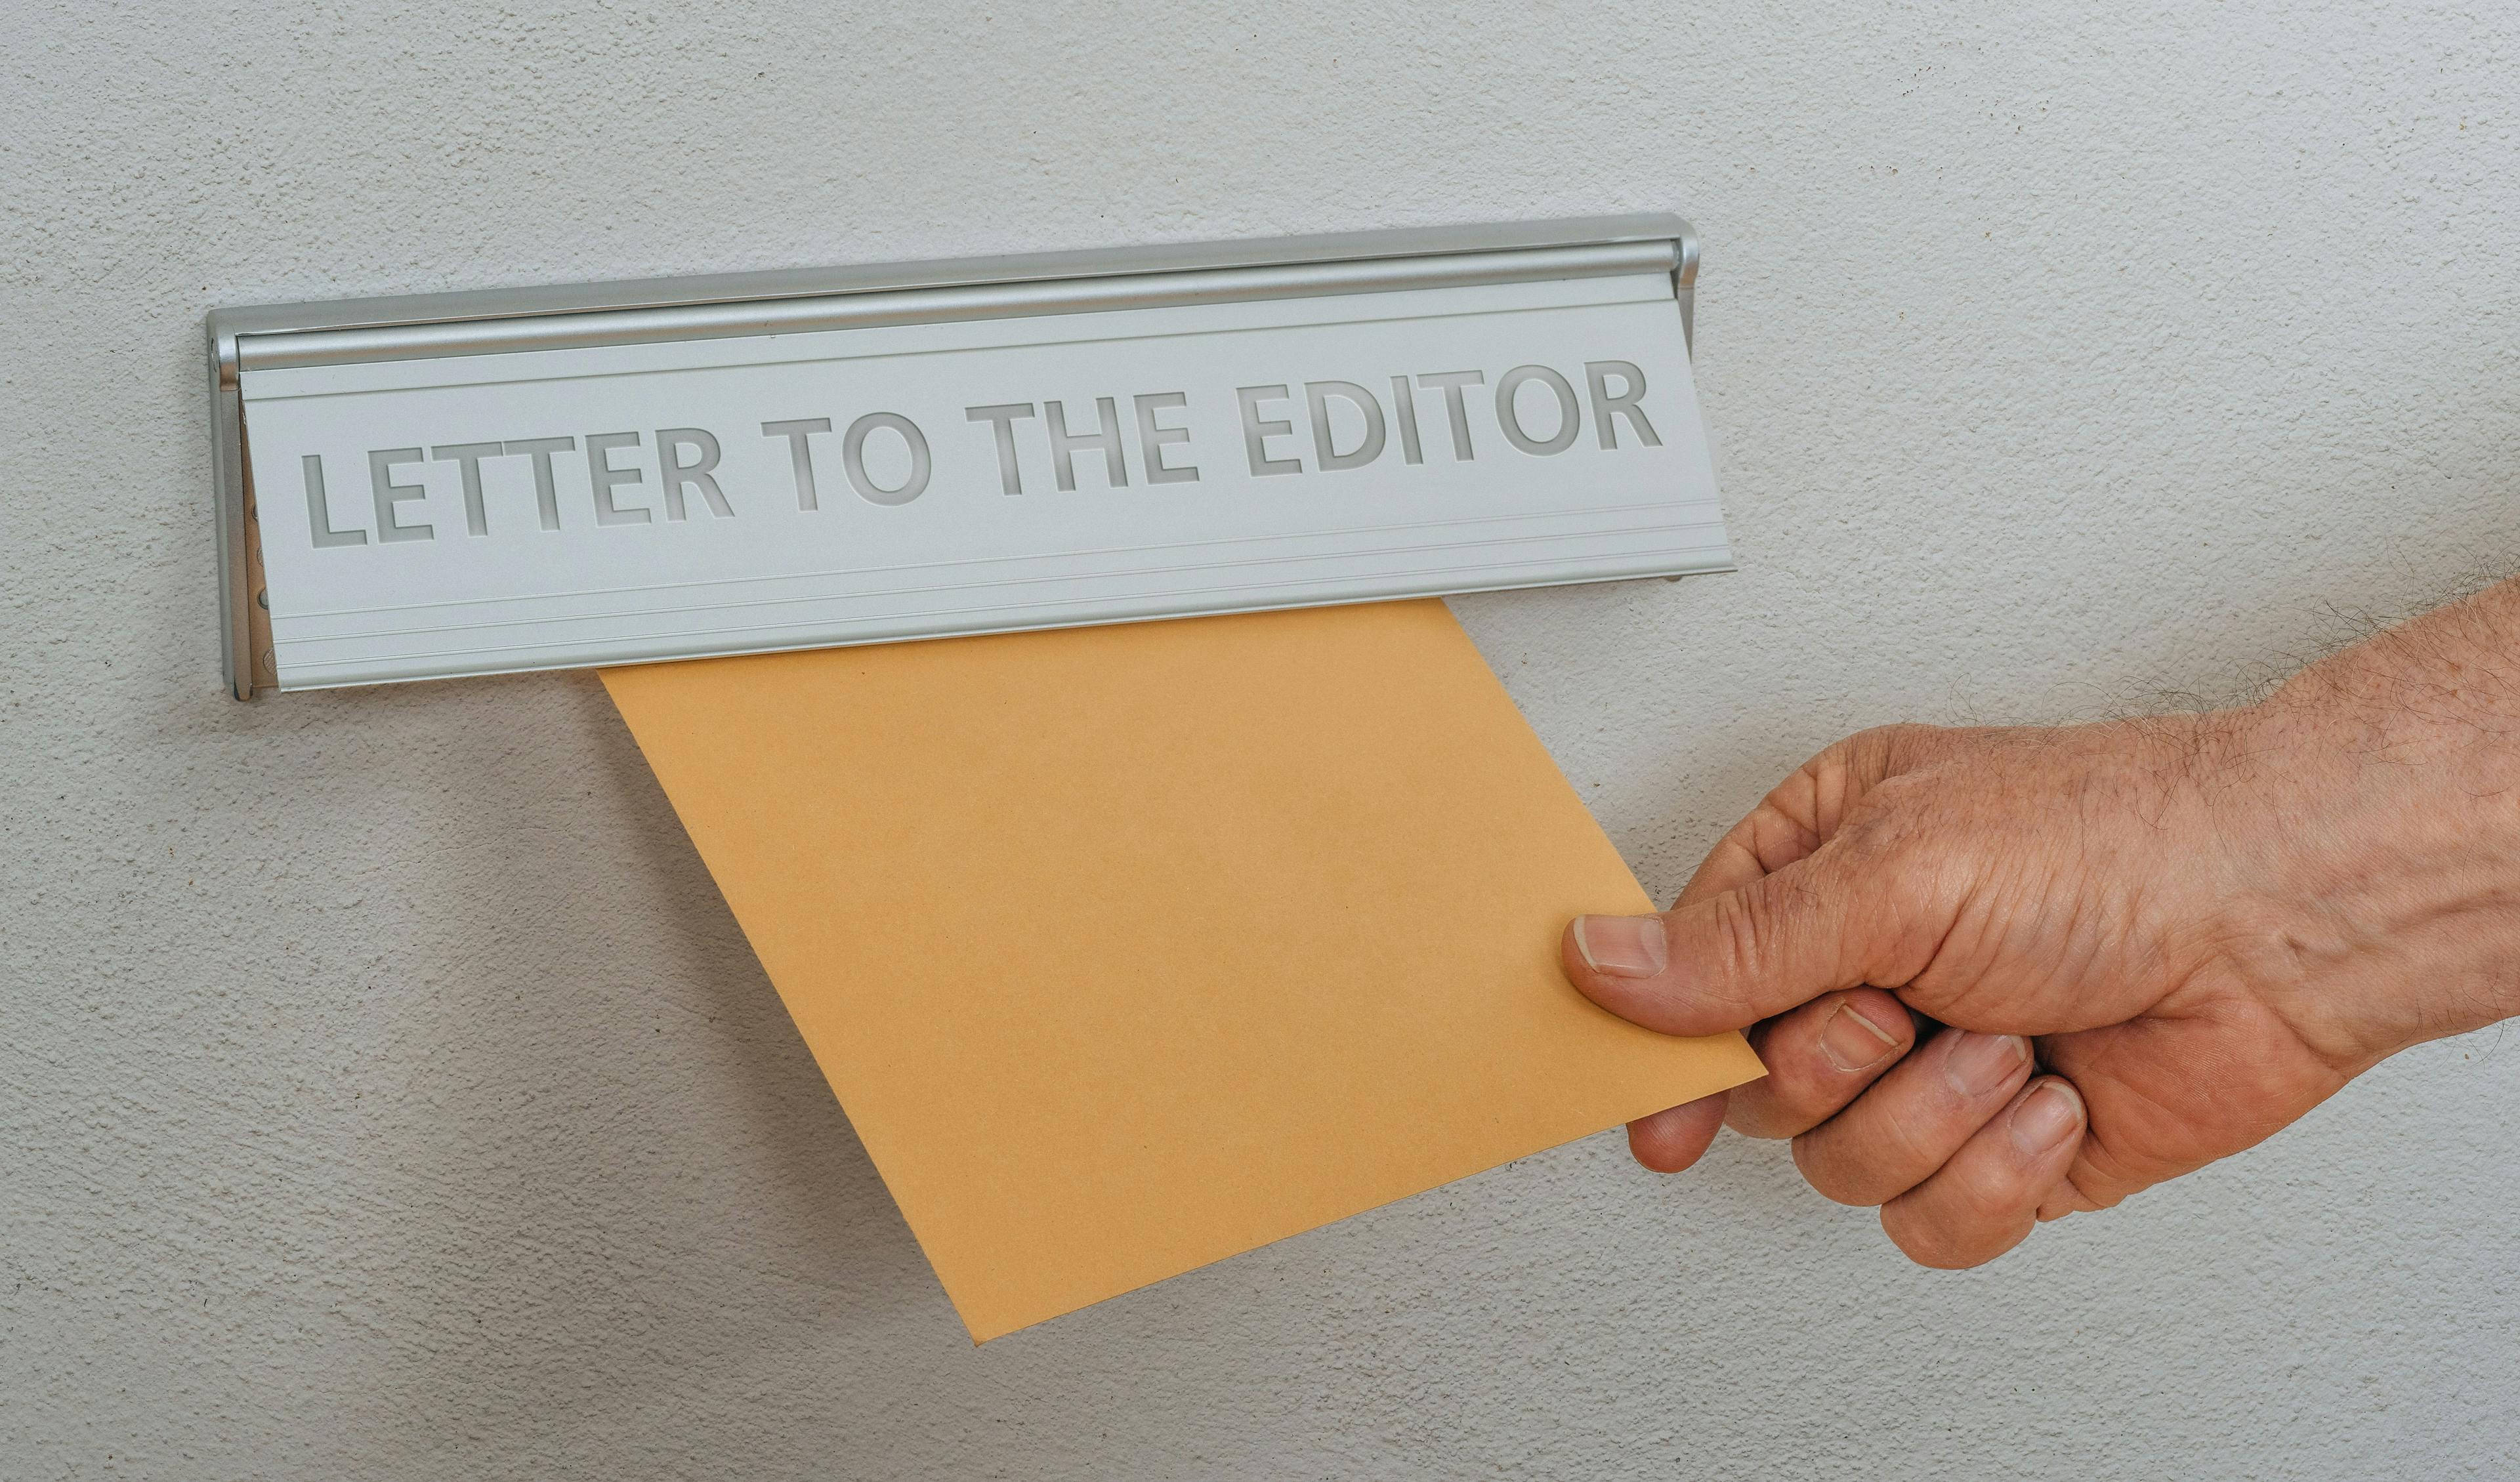 Letter to the editor: © Zerbor - stock.adobe.com